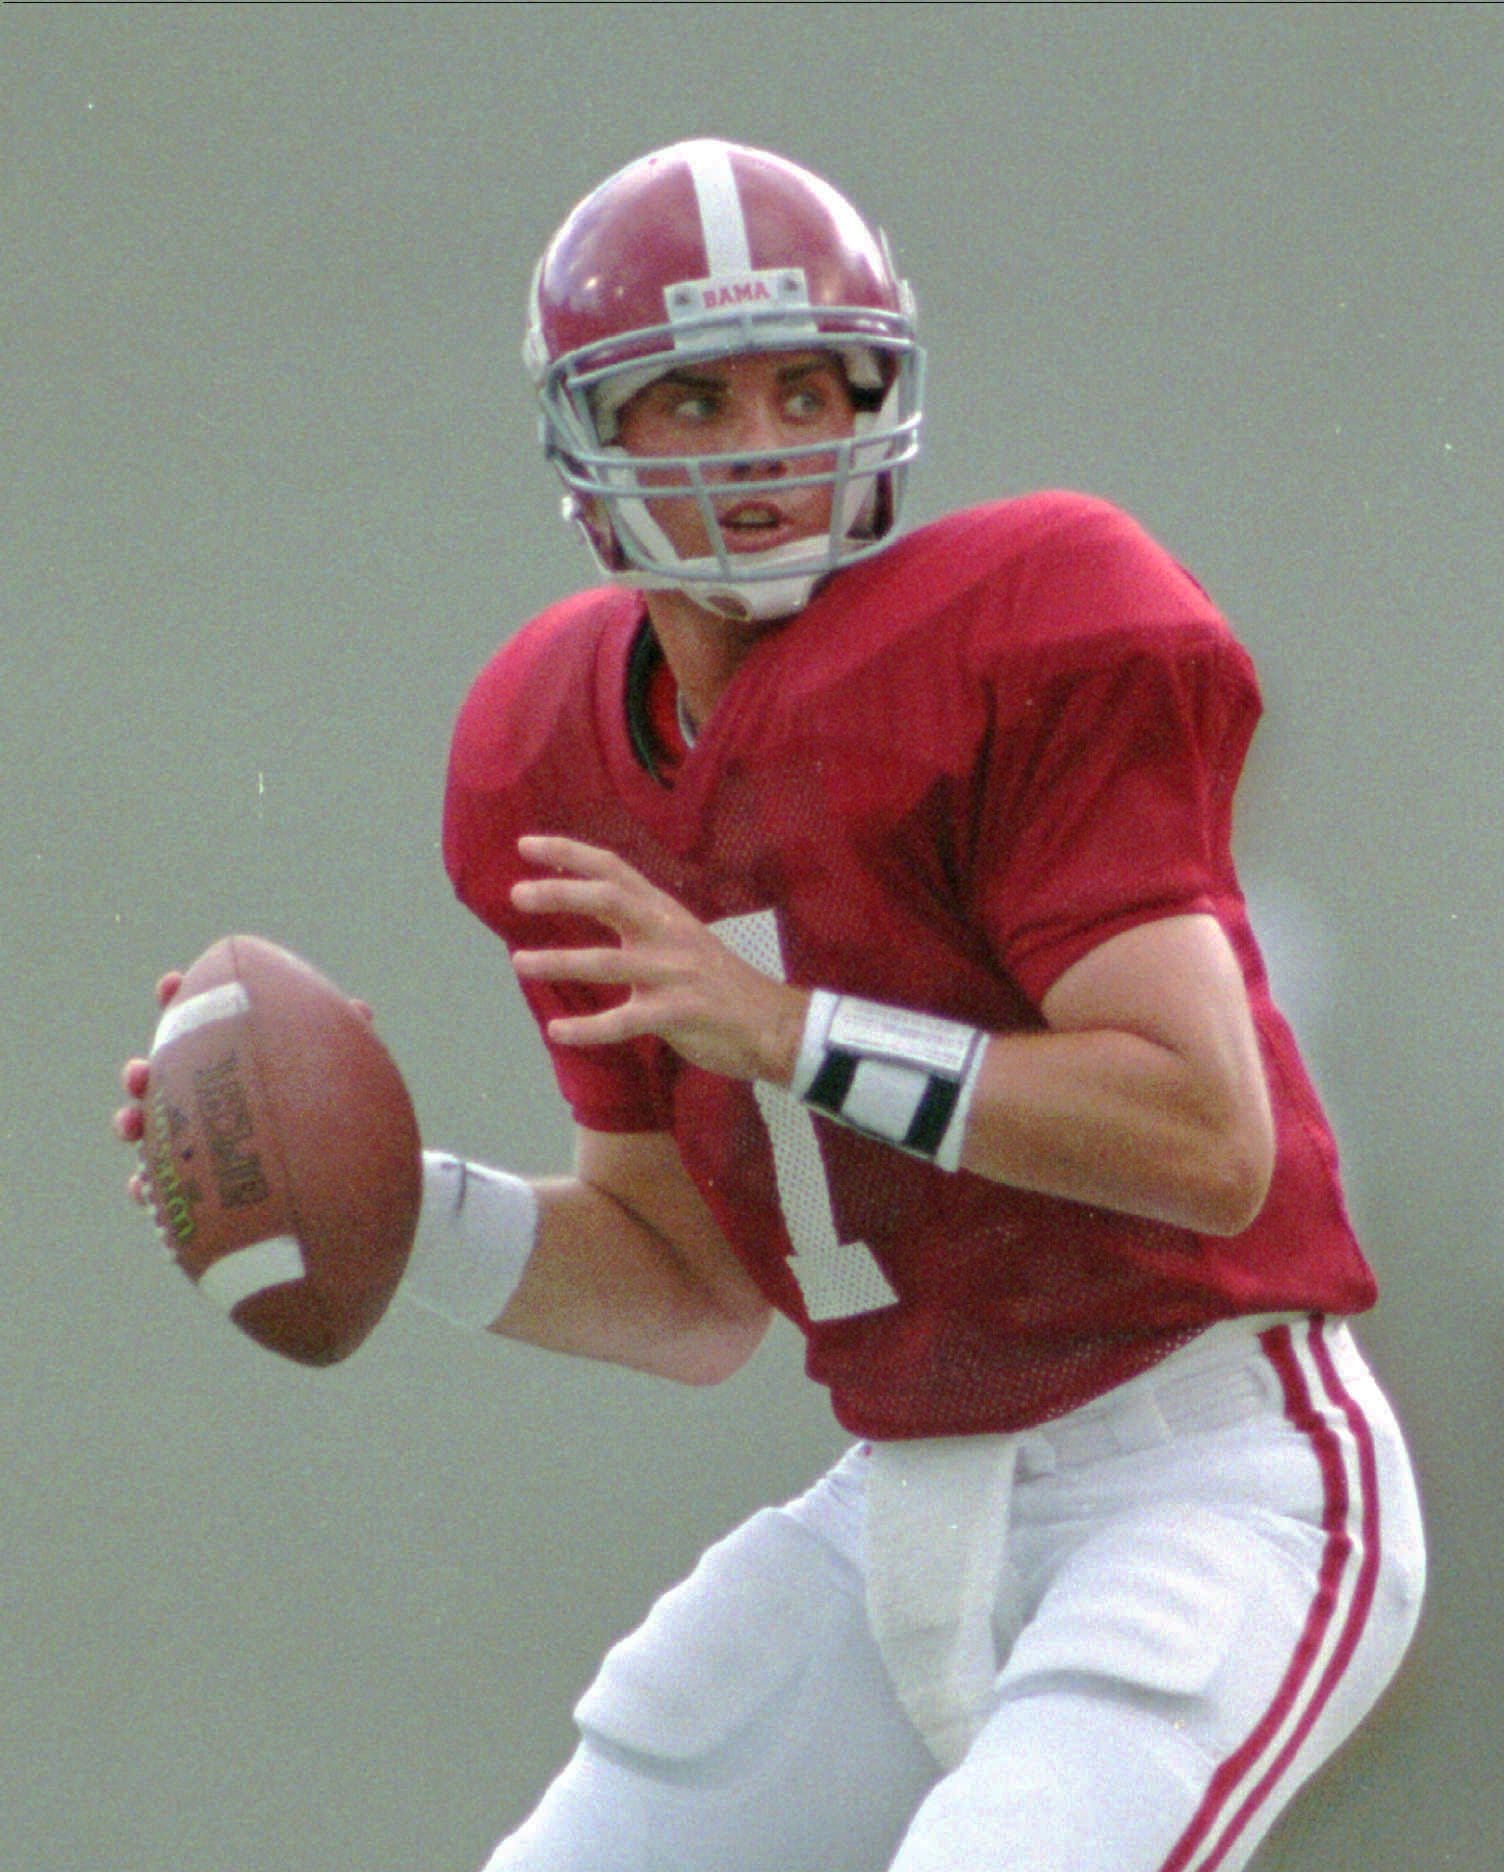 ExAlabama QB Jay Barker arrested after allegedly attempting to hit two